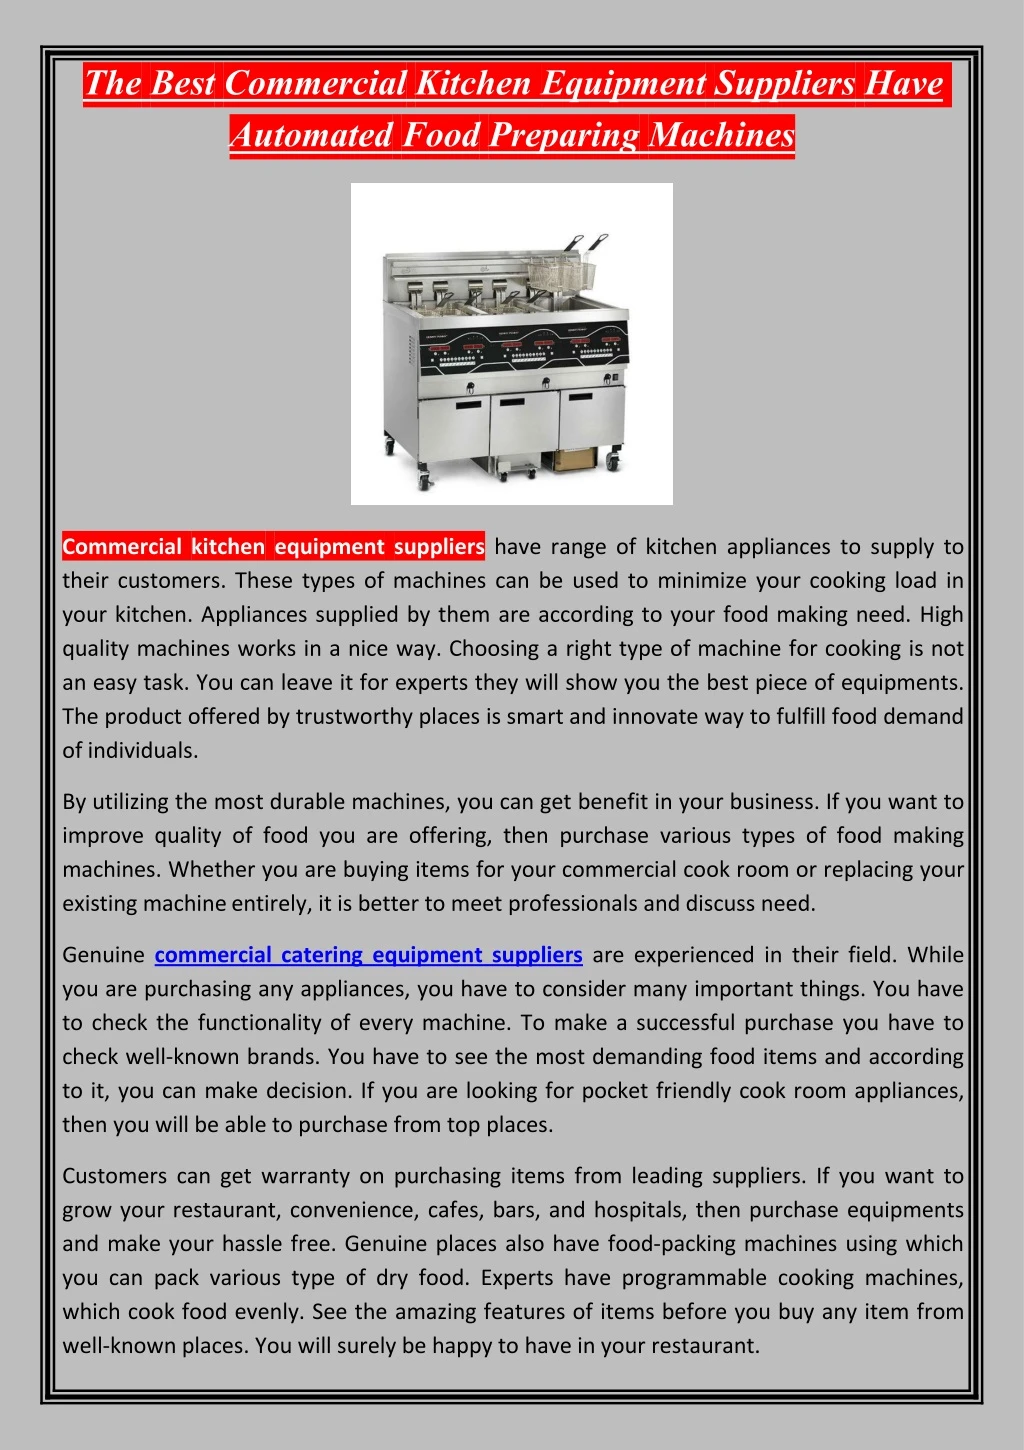 thebest commercial kitchen equipment